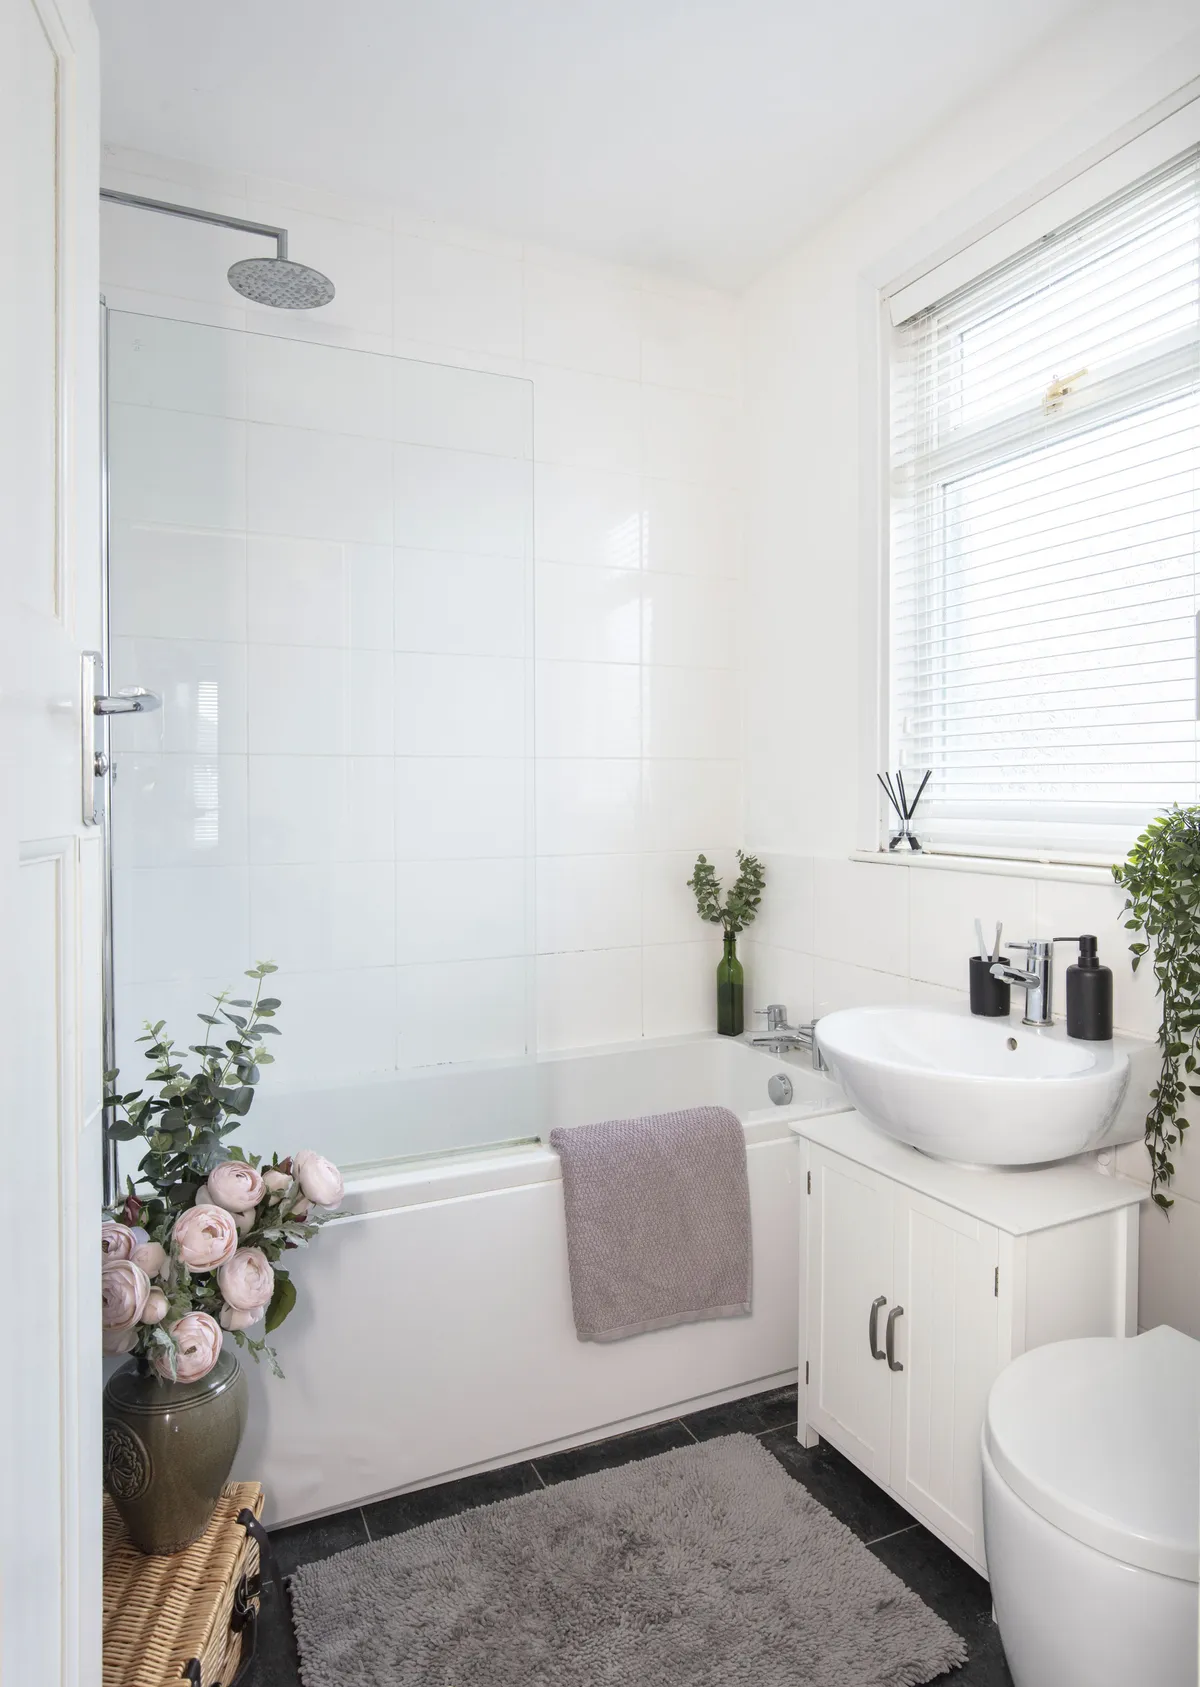 The couple plan to replace the bathroom with a free-standing bath and new tiling, but for now they’ve added pretty lilac touches to the current neutral space